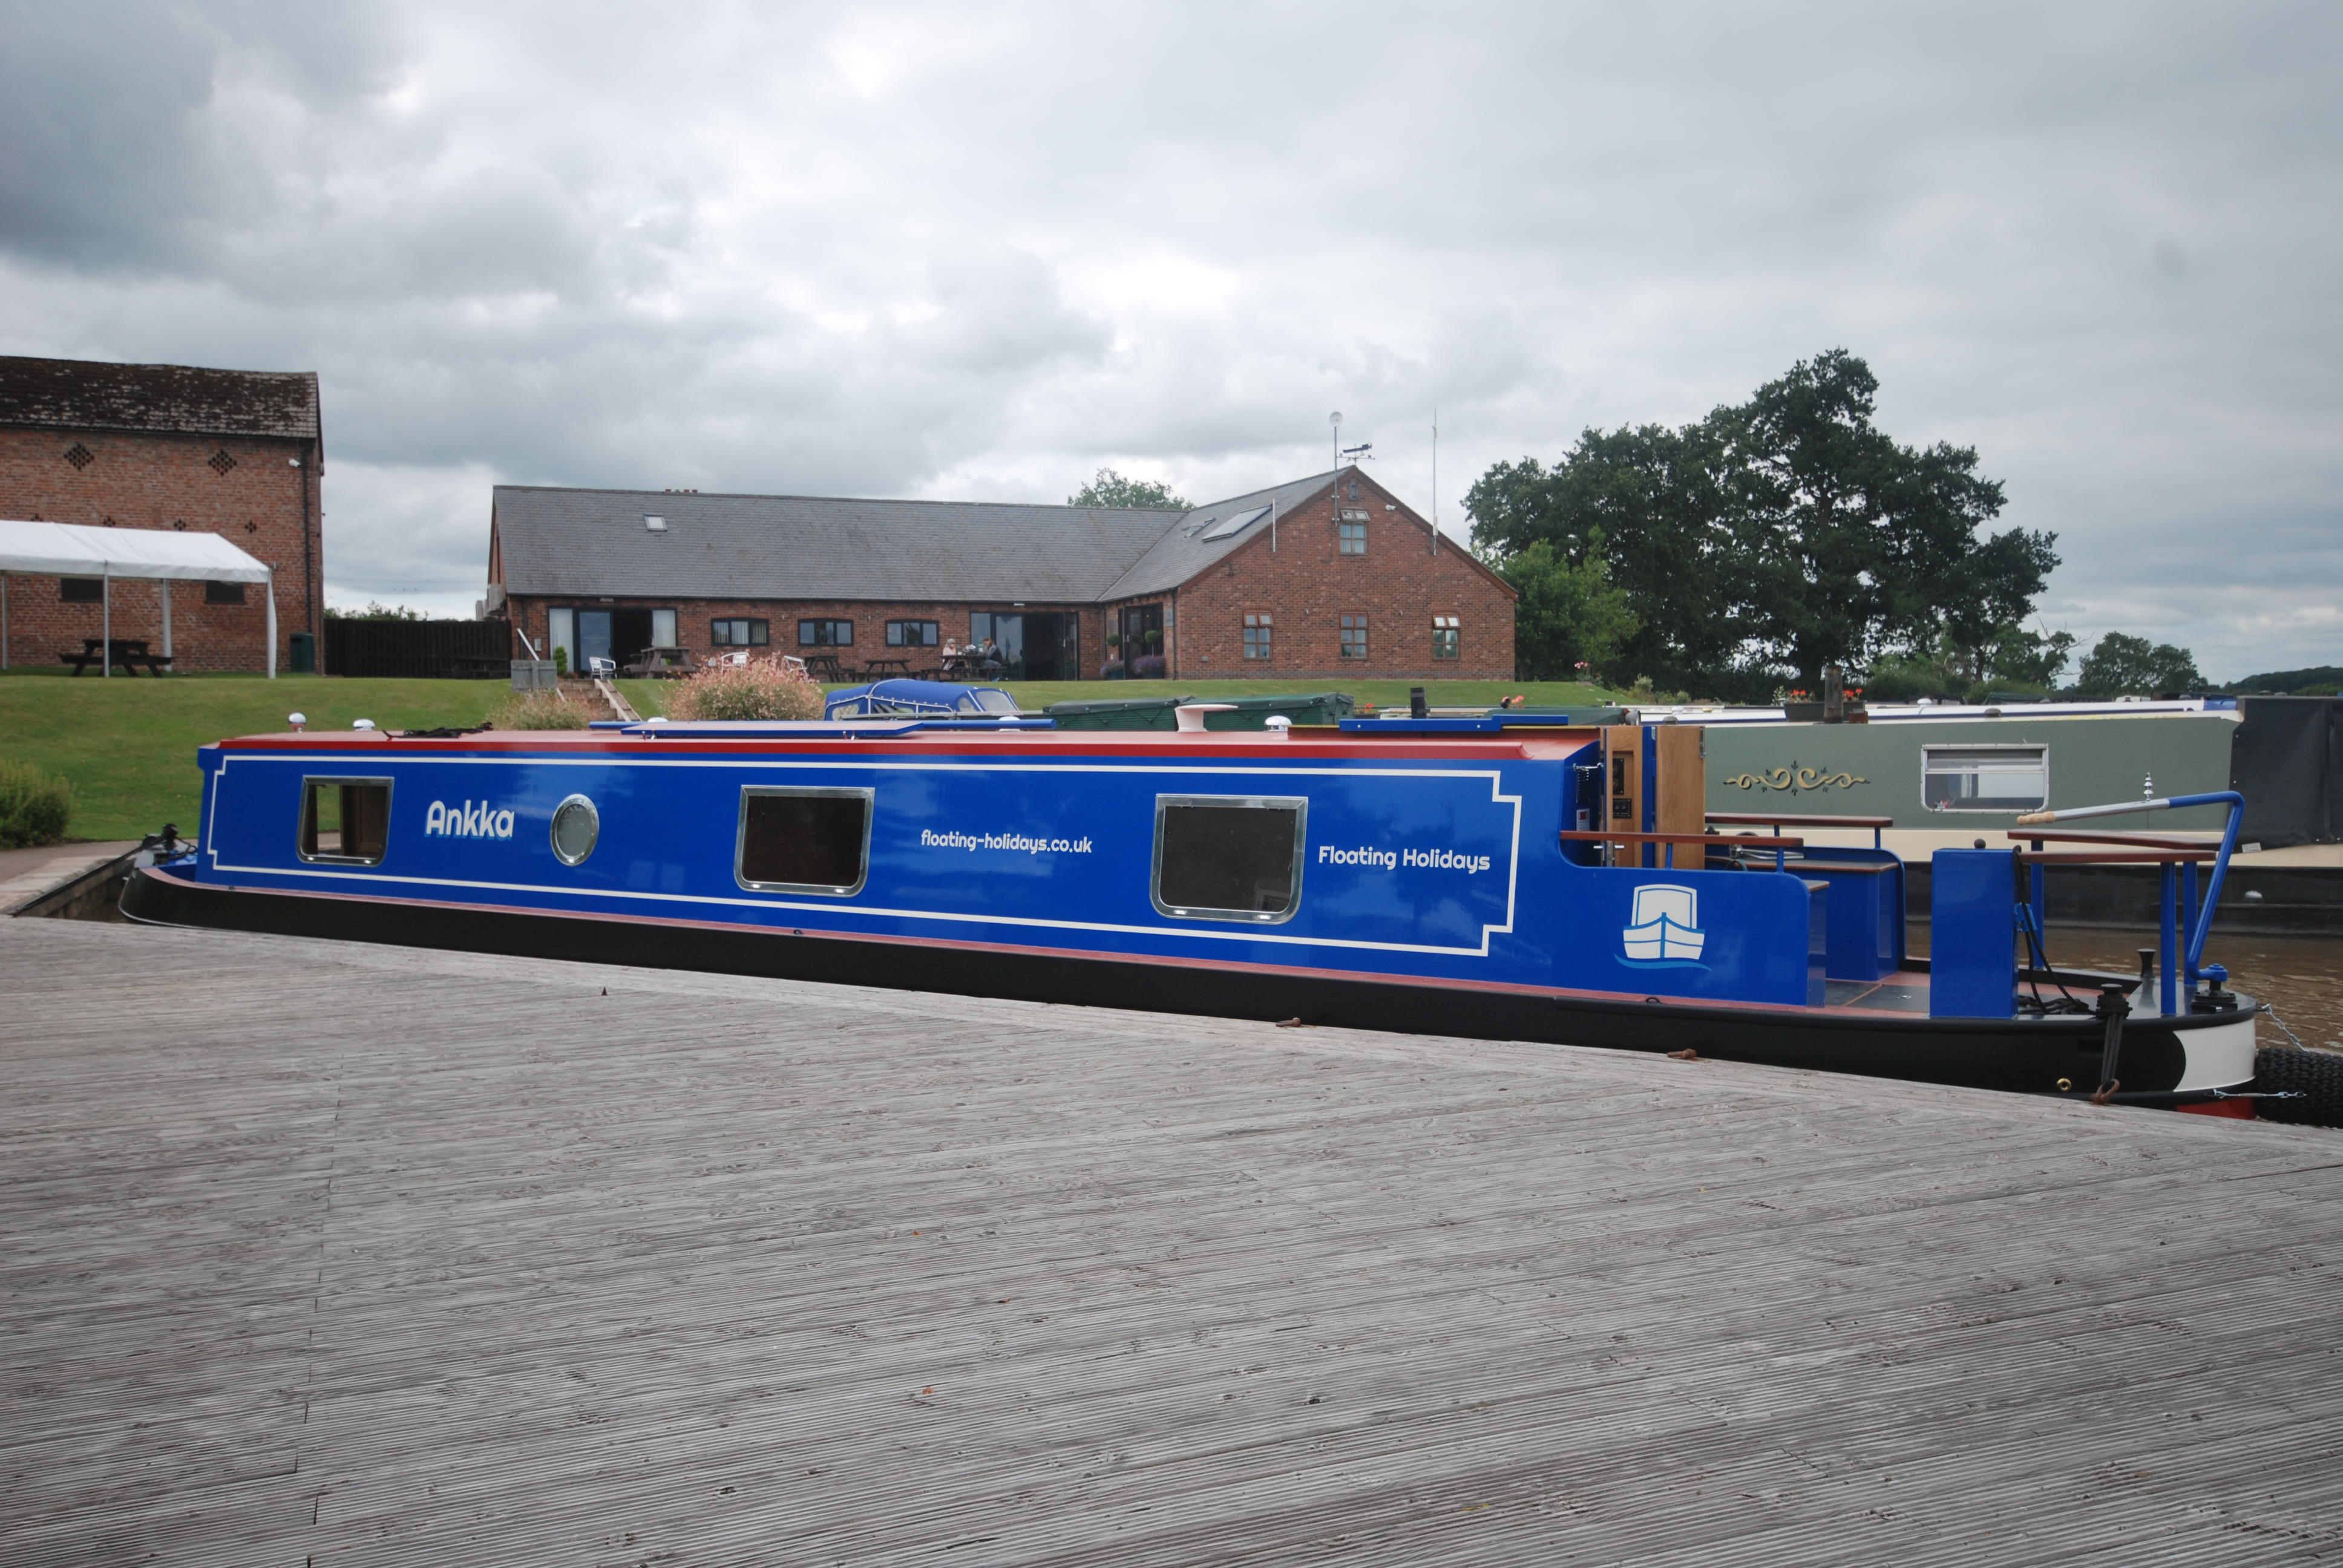 The Ankka class canal boat